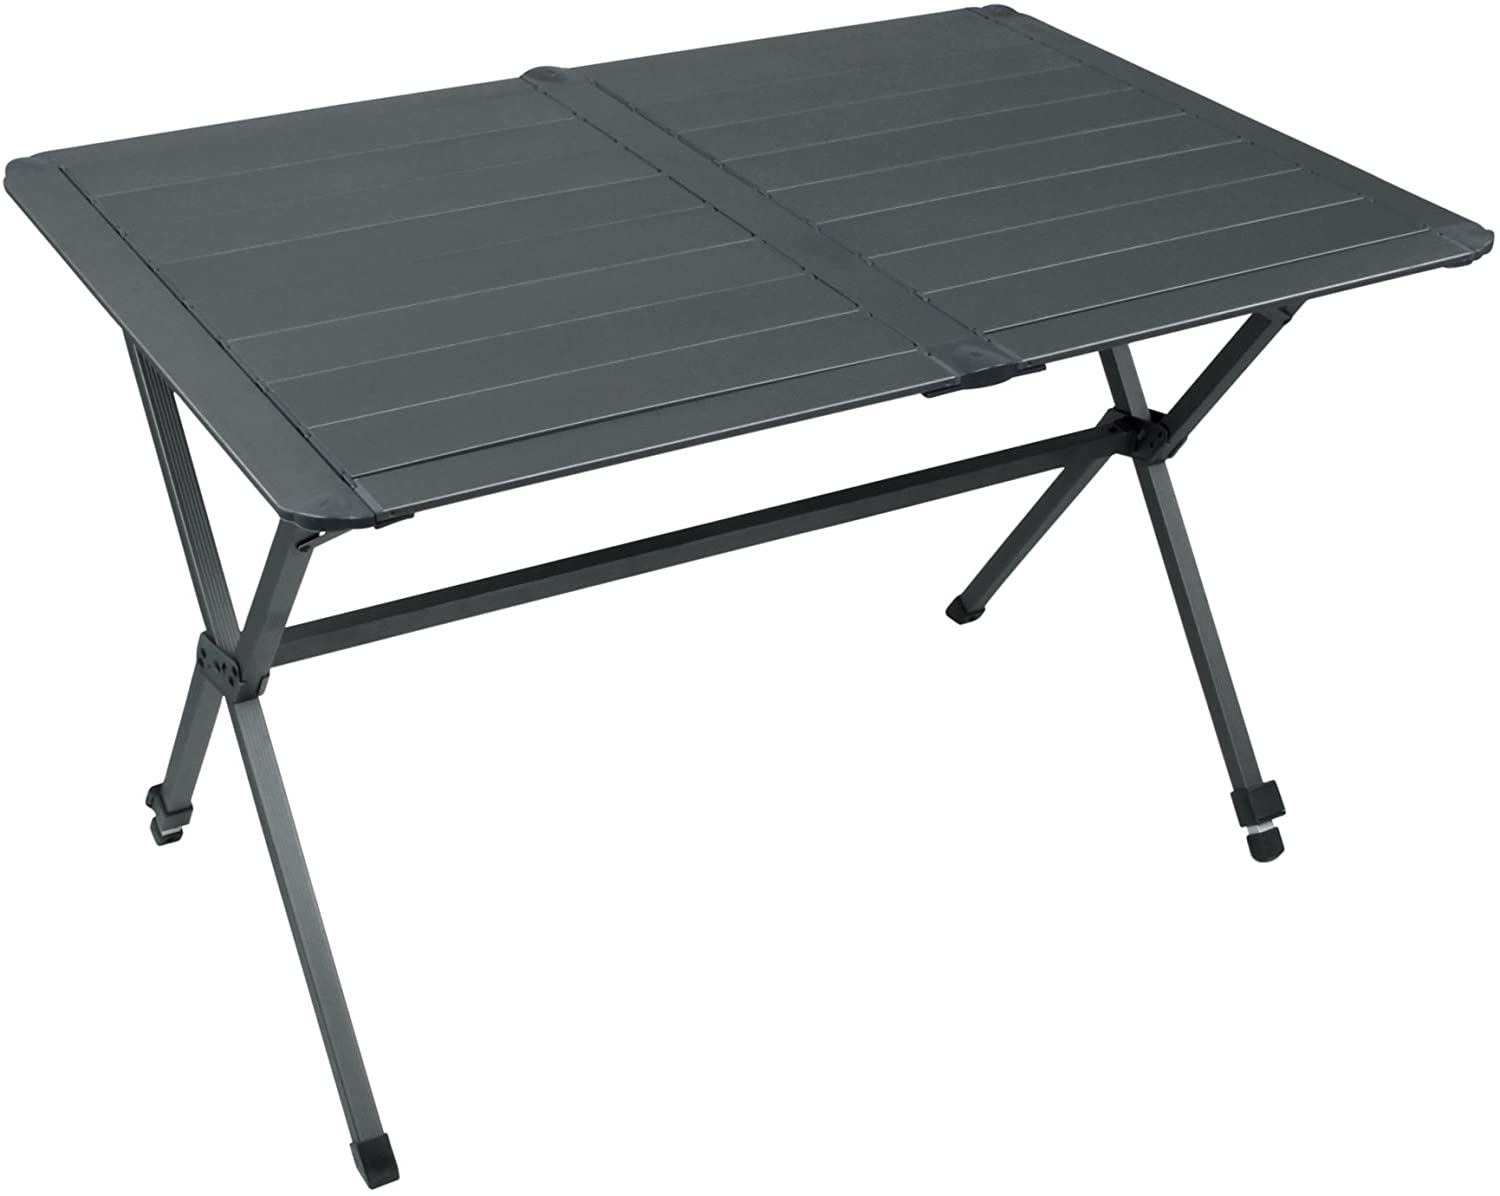 Matedepreso Camping Table,Portable Aluminum Folding Table with Handle for Outdoor BBQ Heavy Duty 